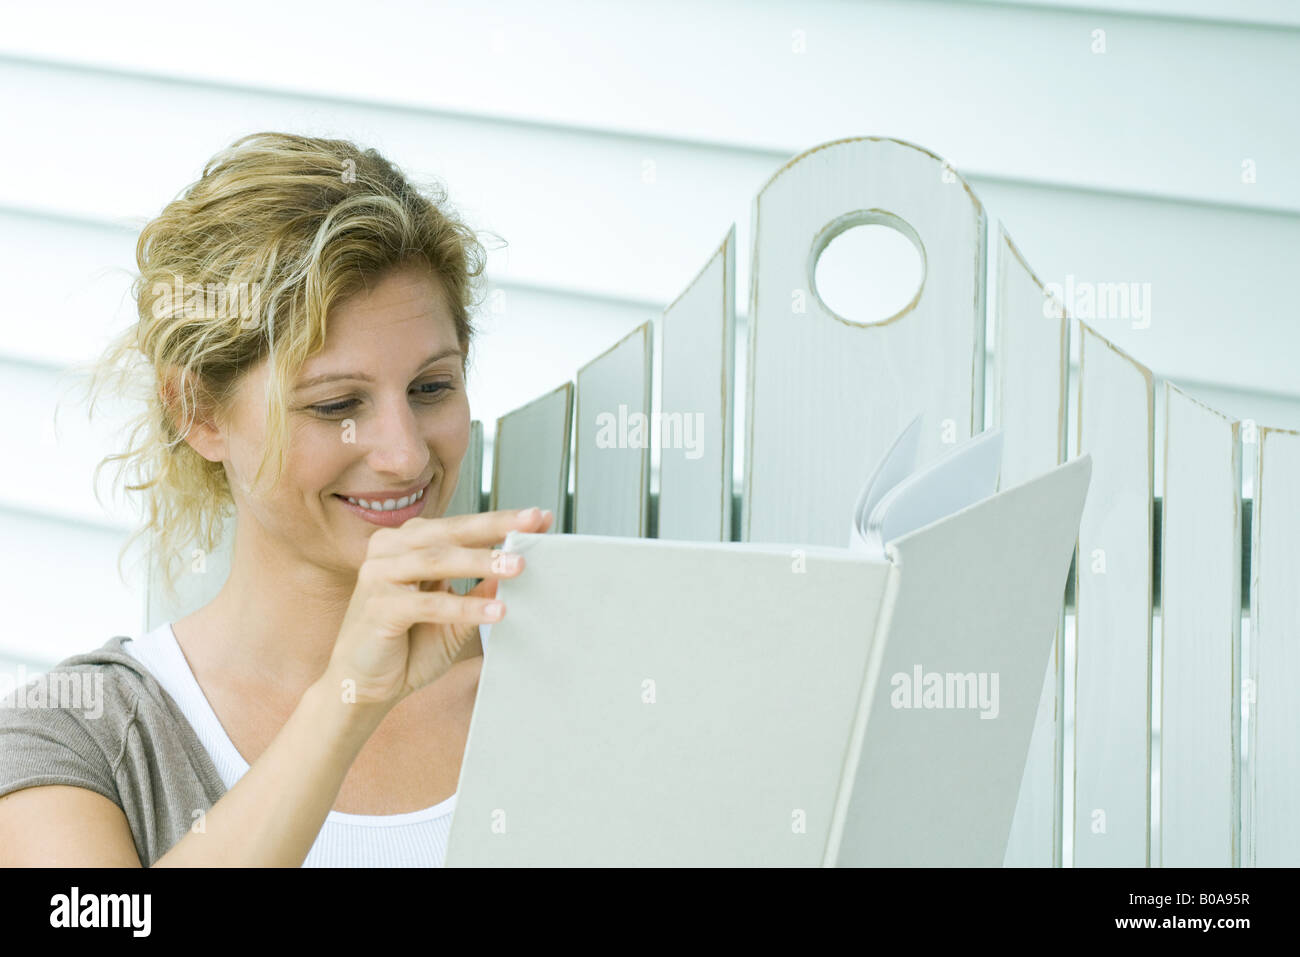 Woman on bench reading book, smiling, close-up Stock Photo